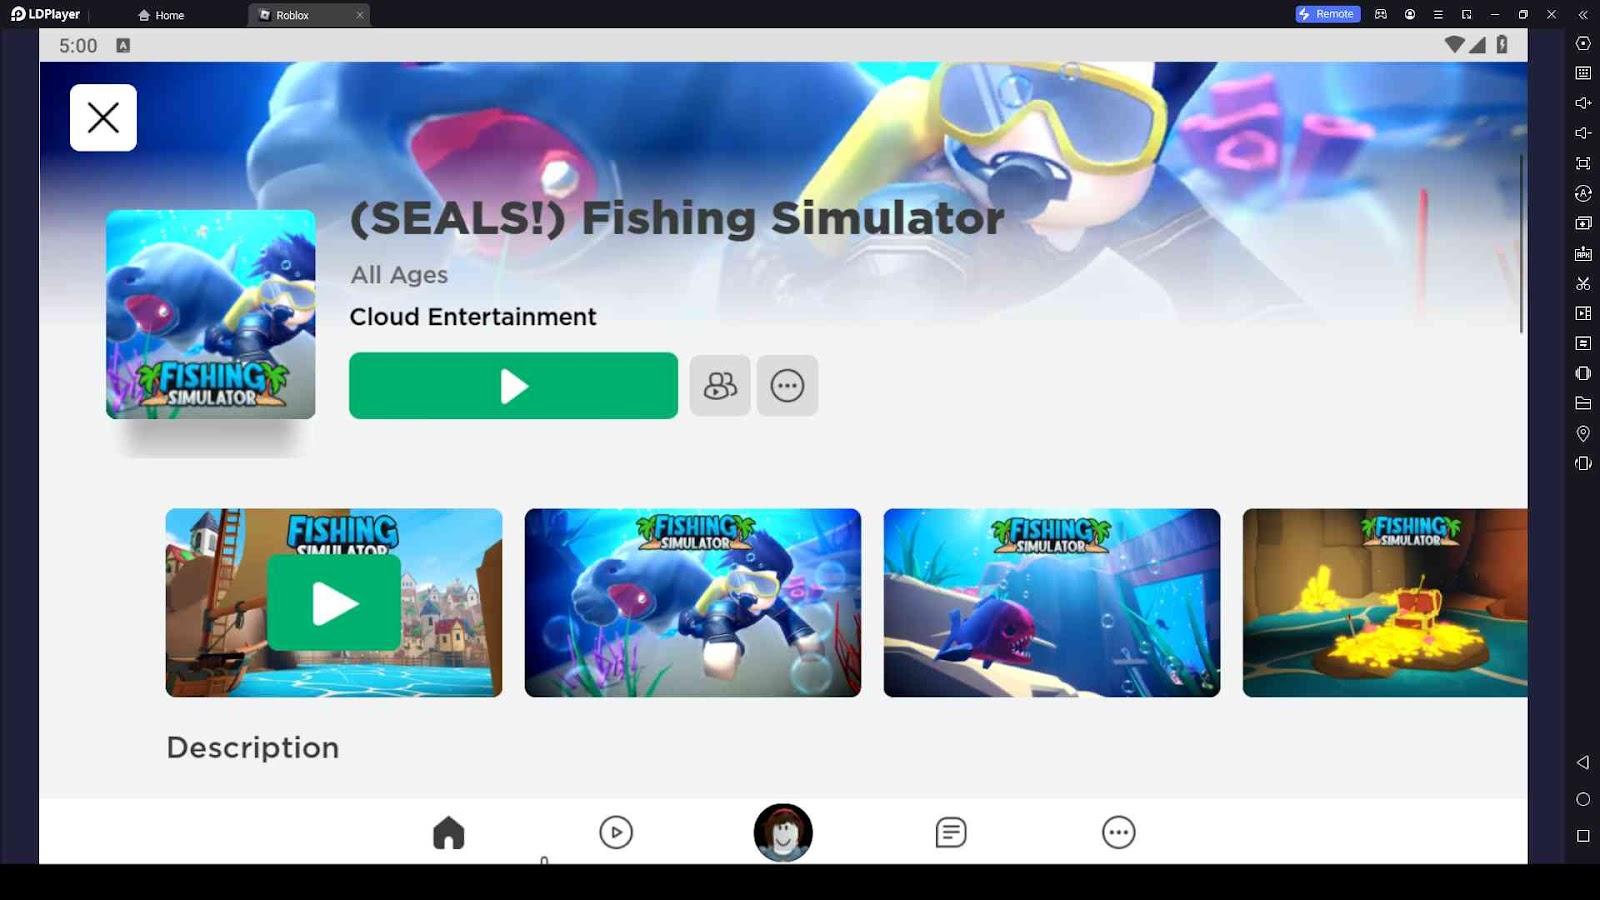 Cloud Entertainment: Fishing Simulator - Events and Updates